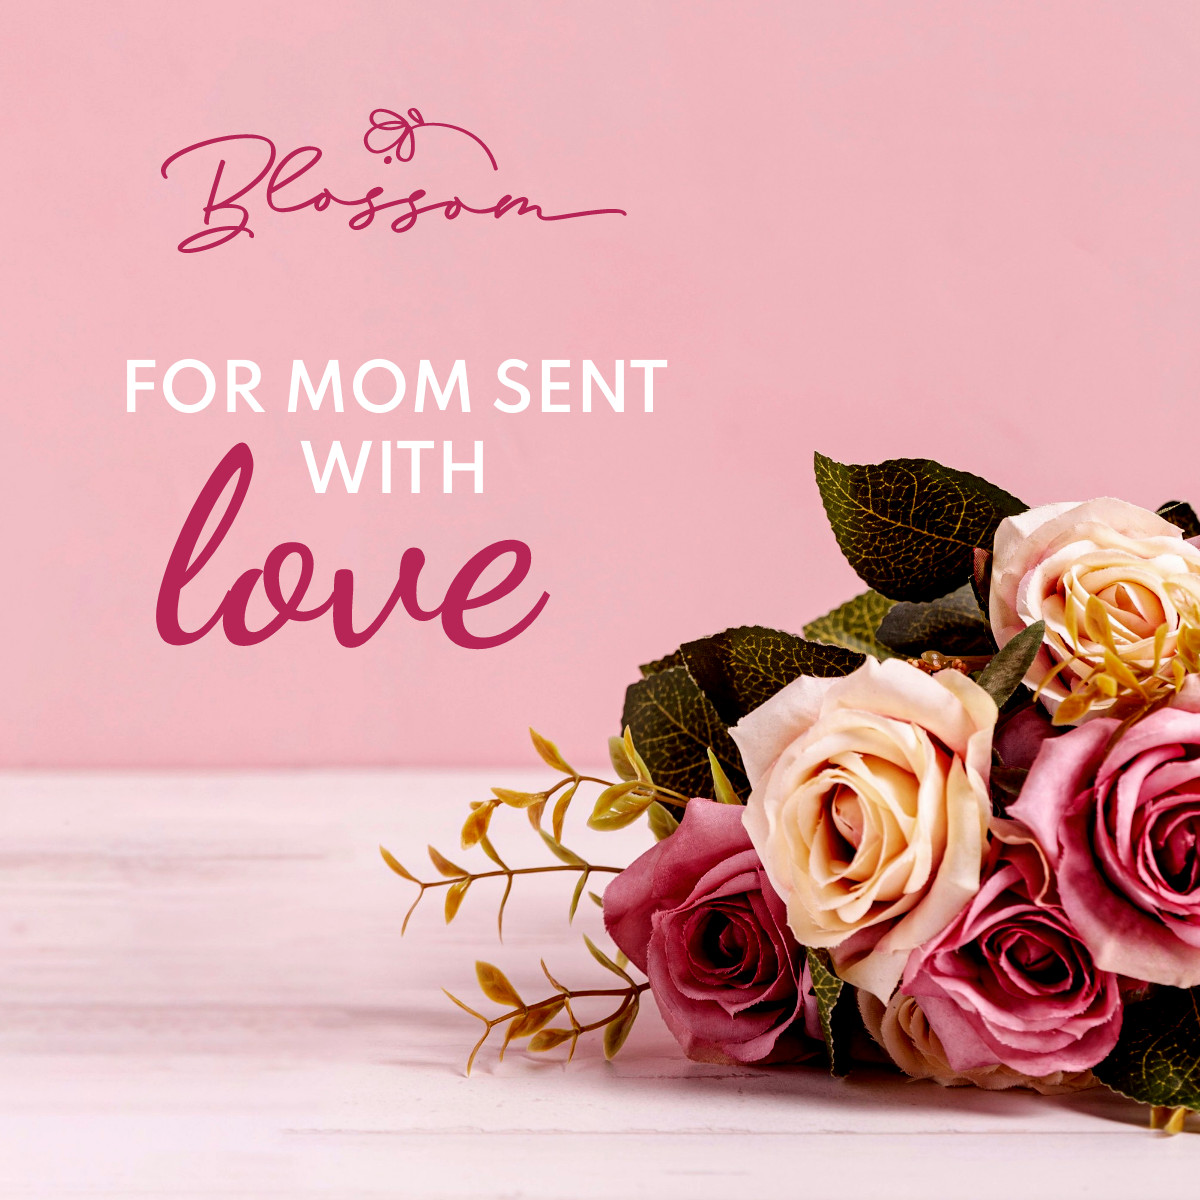 Sent with Love Mother's Day Flowers